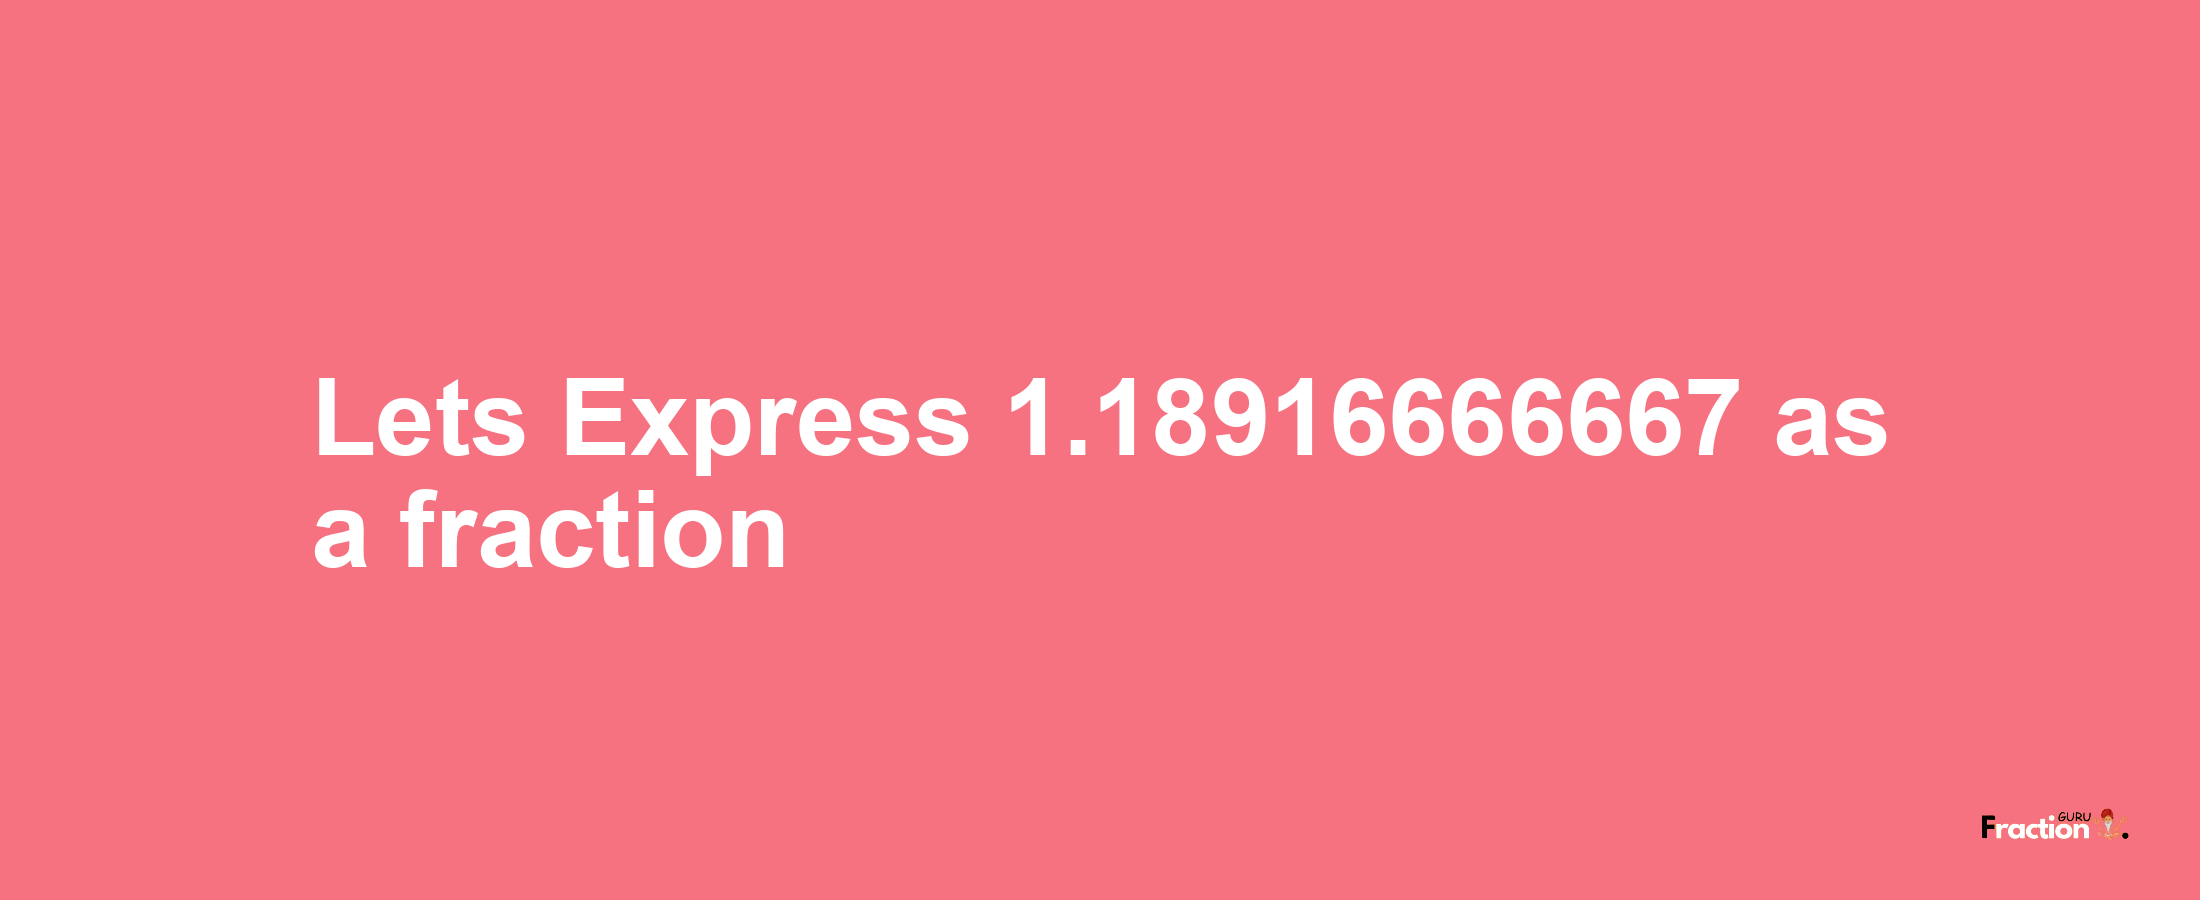 Lets Express 1.18916666667 as afraction